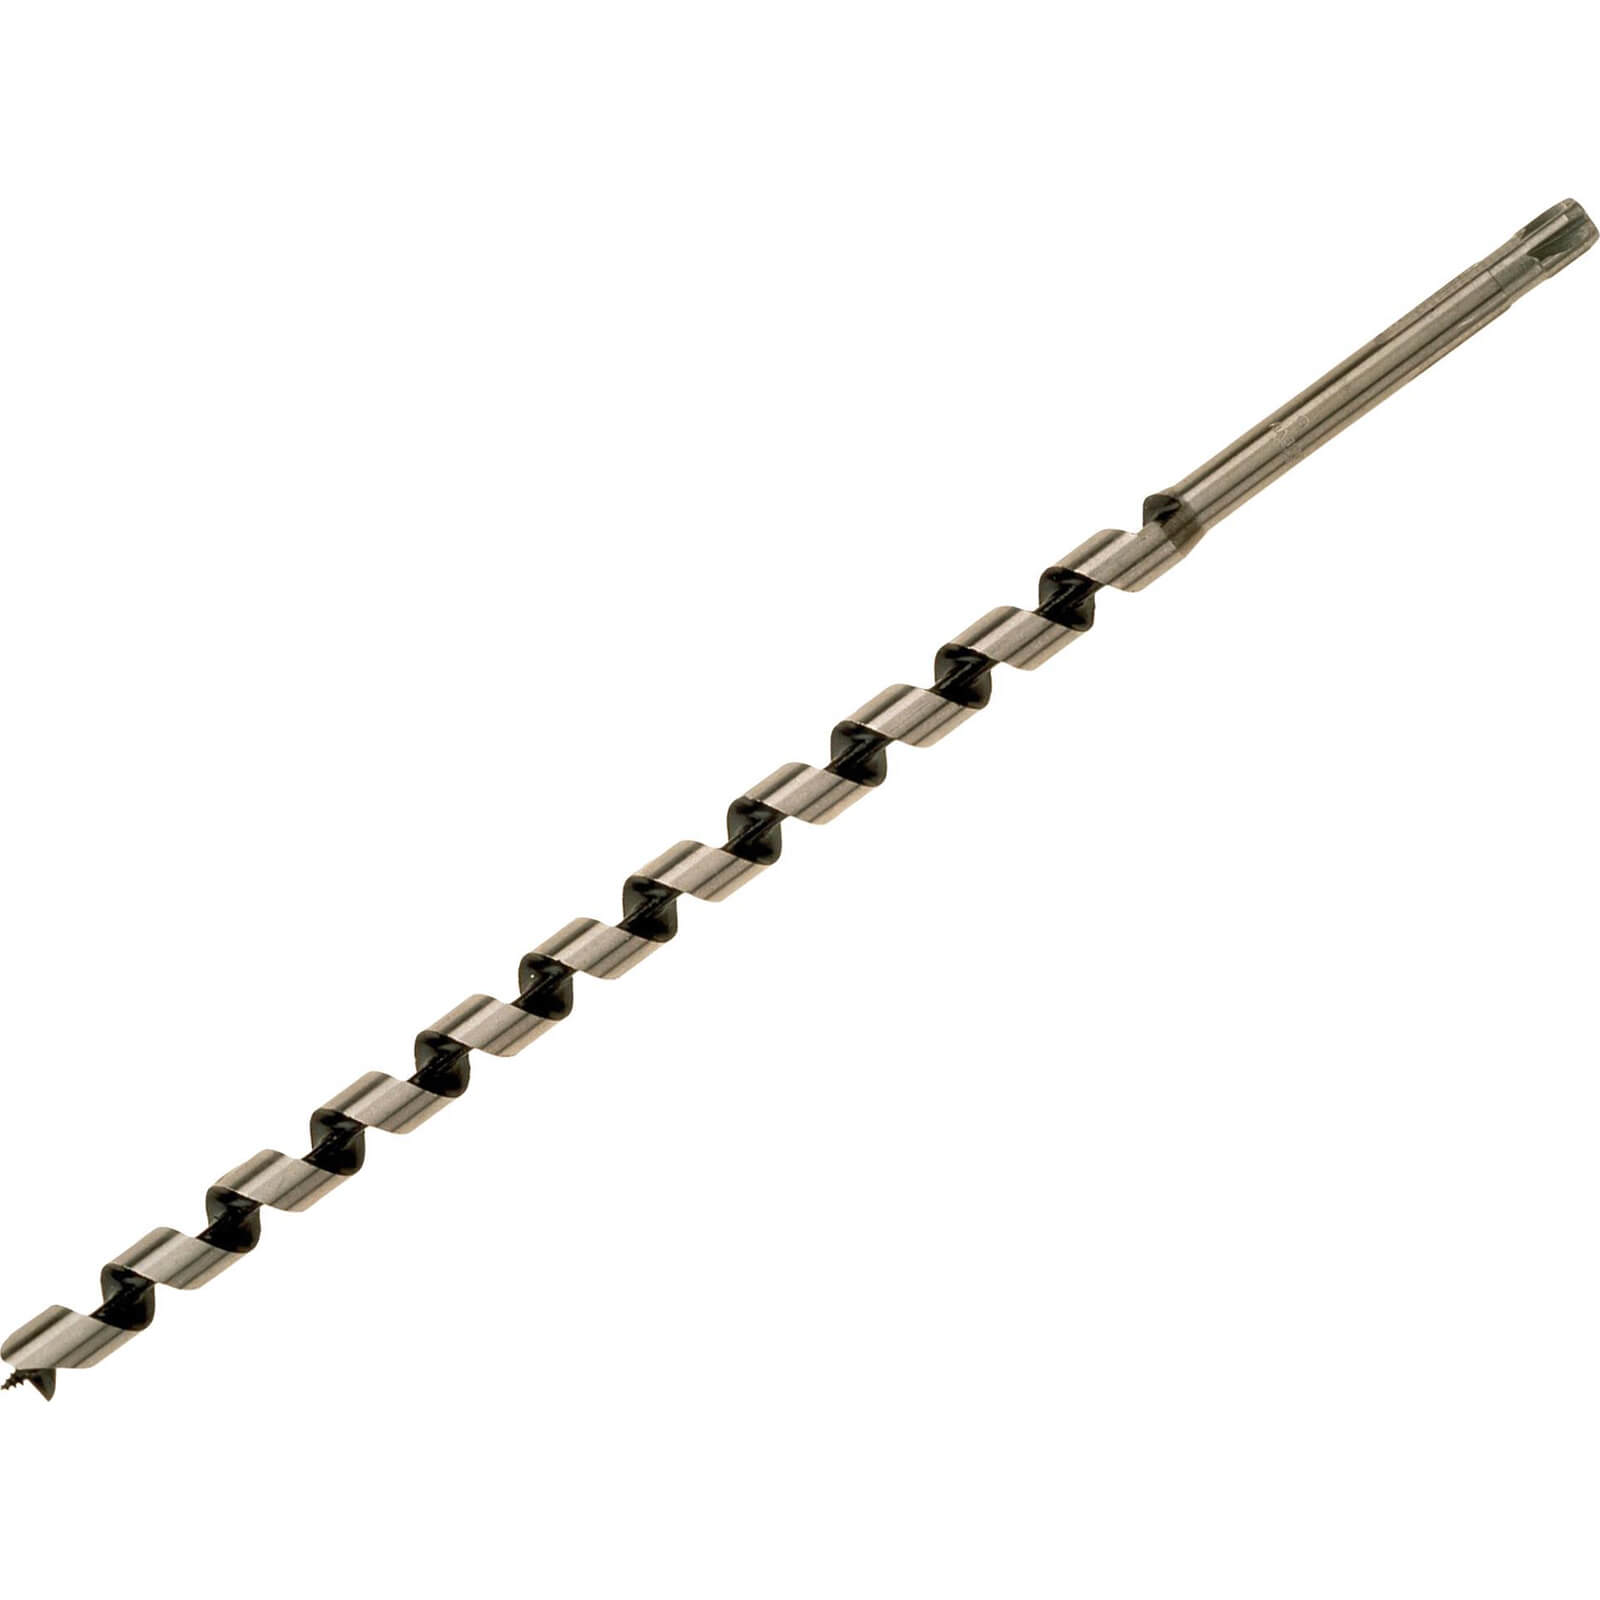 Image of Bahco 9627 Series Long Combination Auger Drill Bit 16mm 460mm